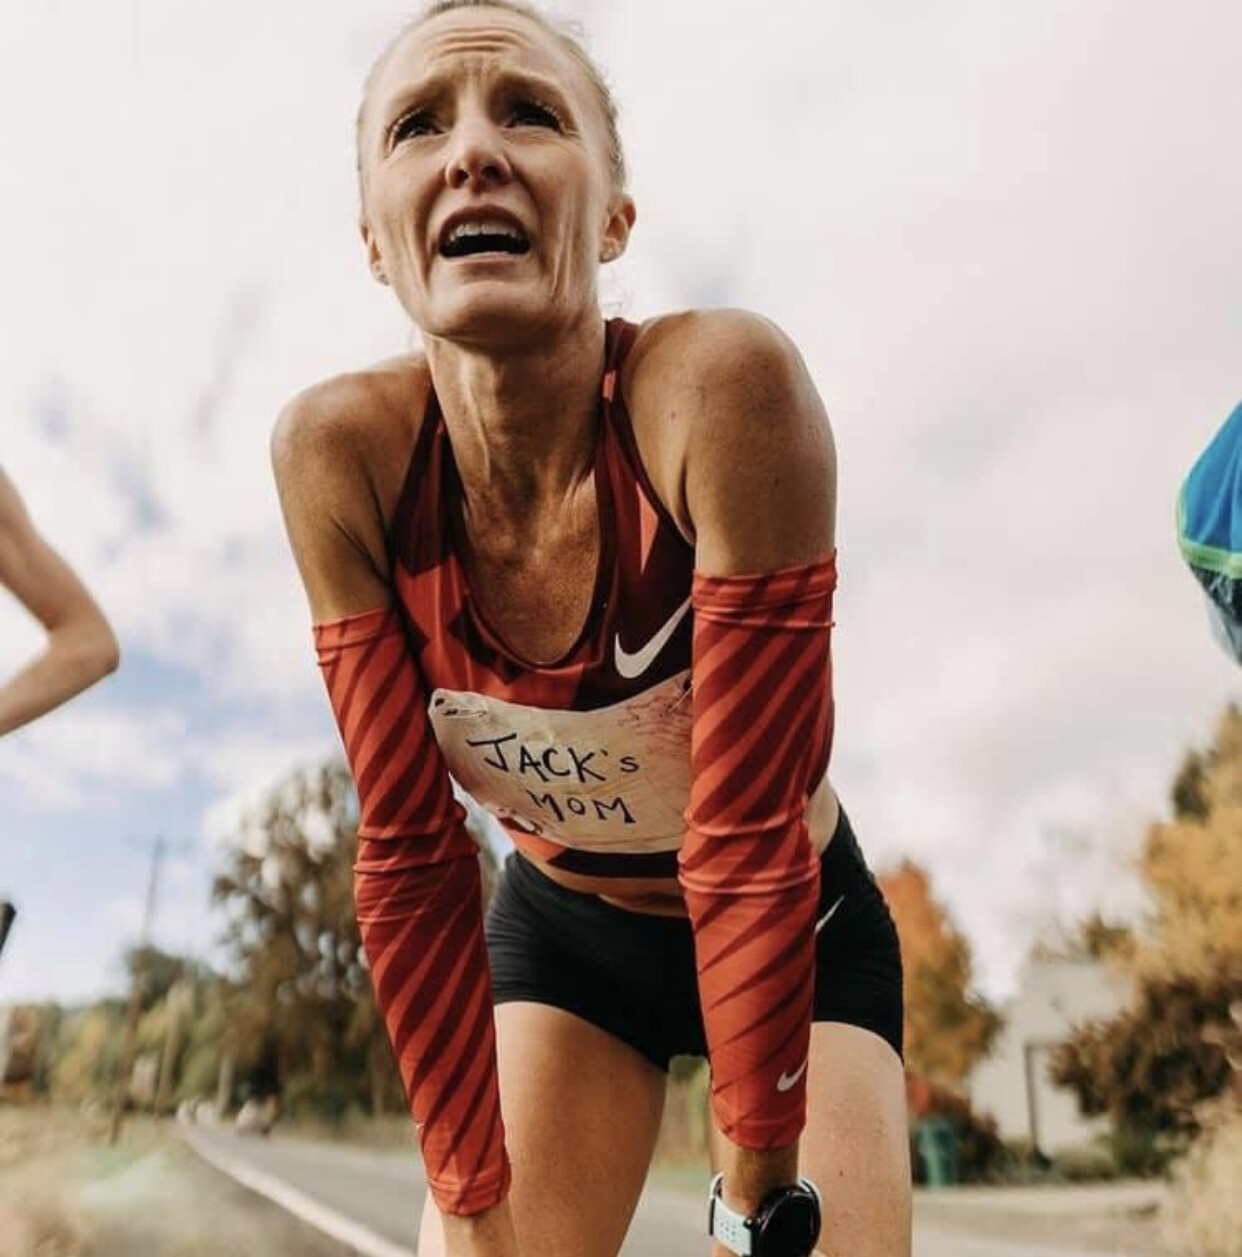 5 Marathons Down, One to Go: Takeaways From Shalane Flanagan’s Fall “Eclipse”